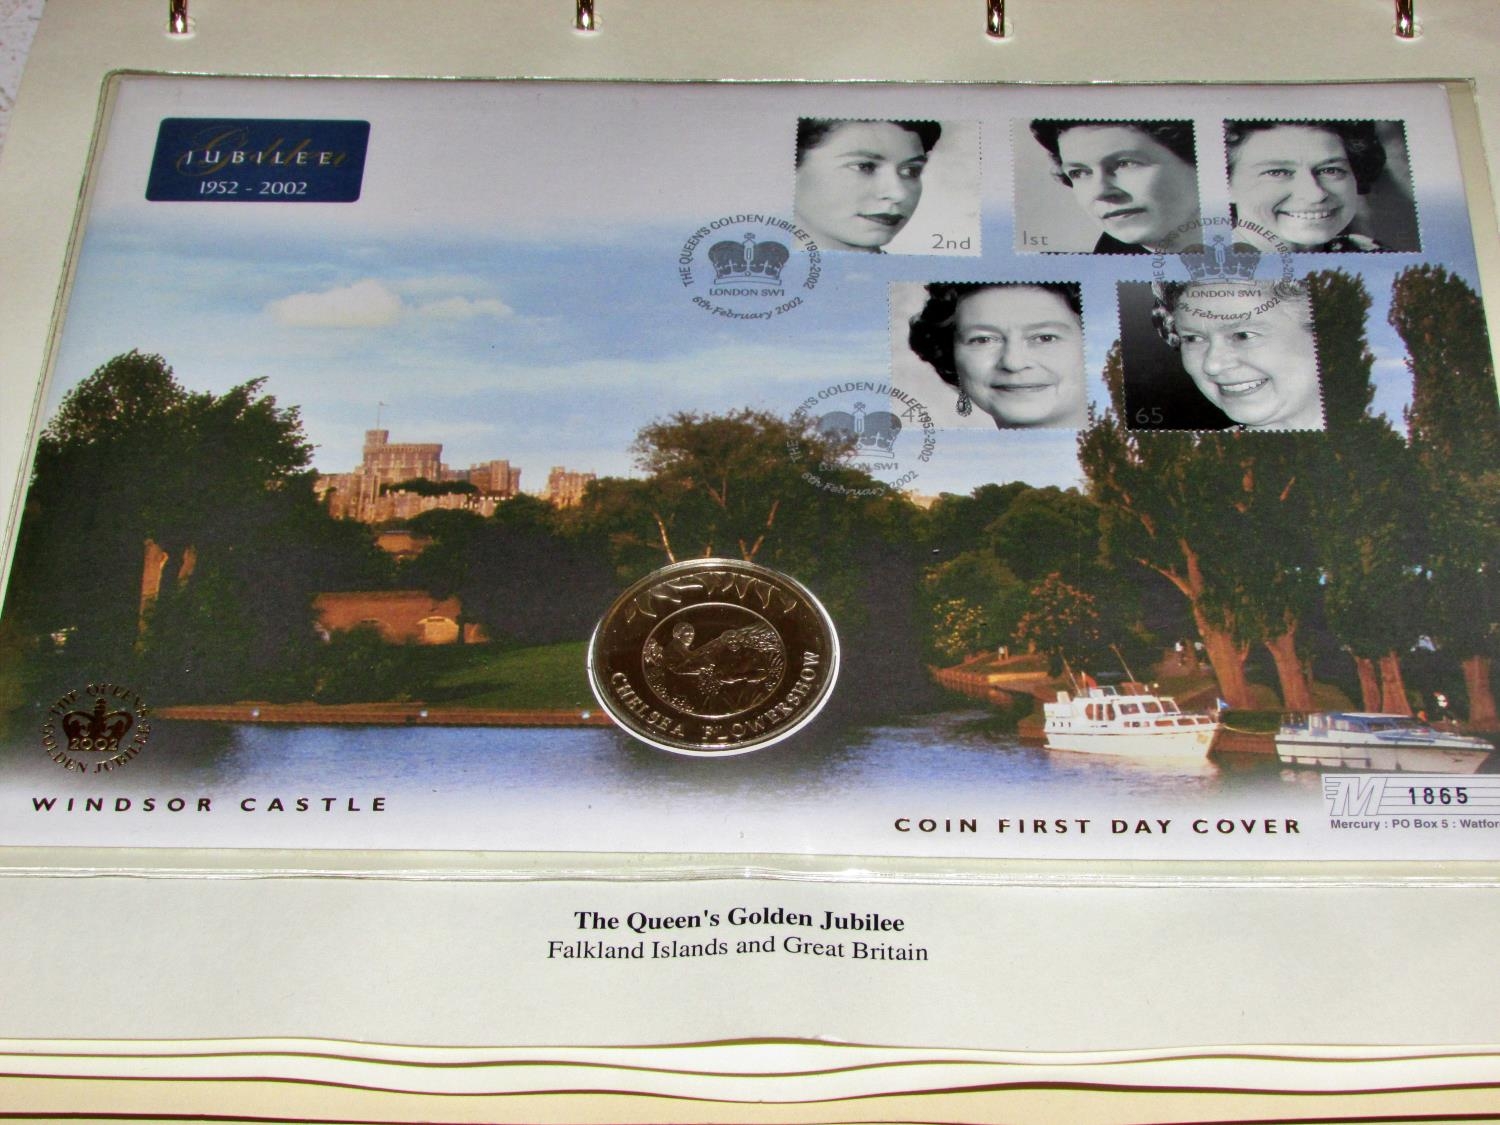 A folder of Coin First Day Covers 2002 to celebrate Queen Elizabeth II Golden Jubilee - Image 2 of 4